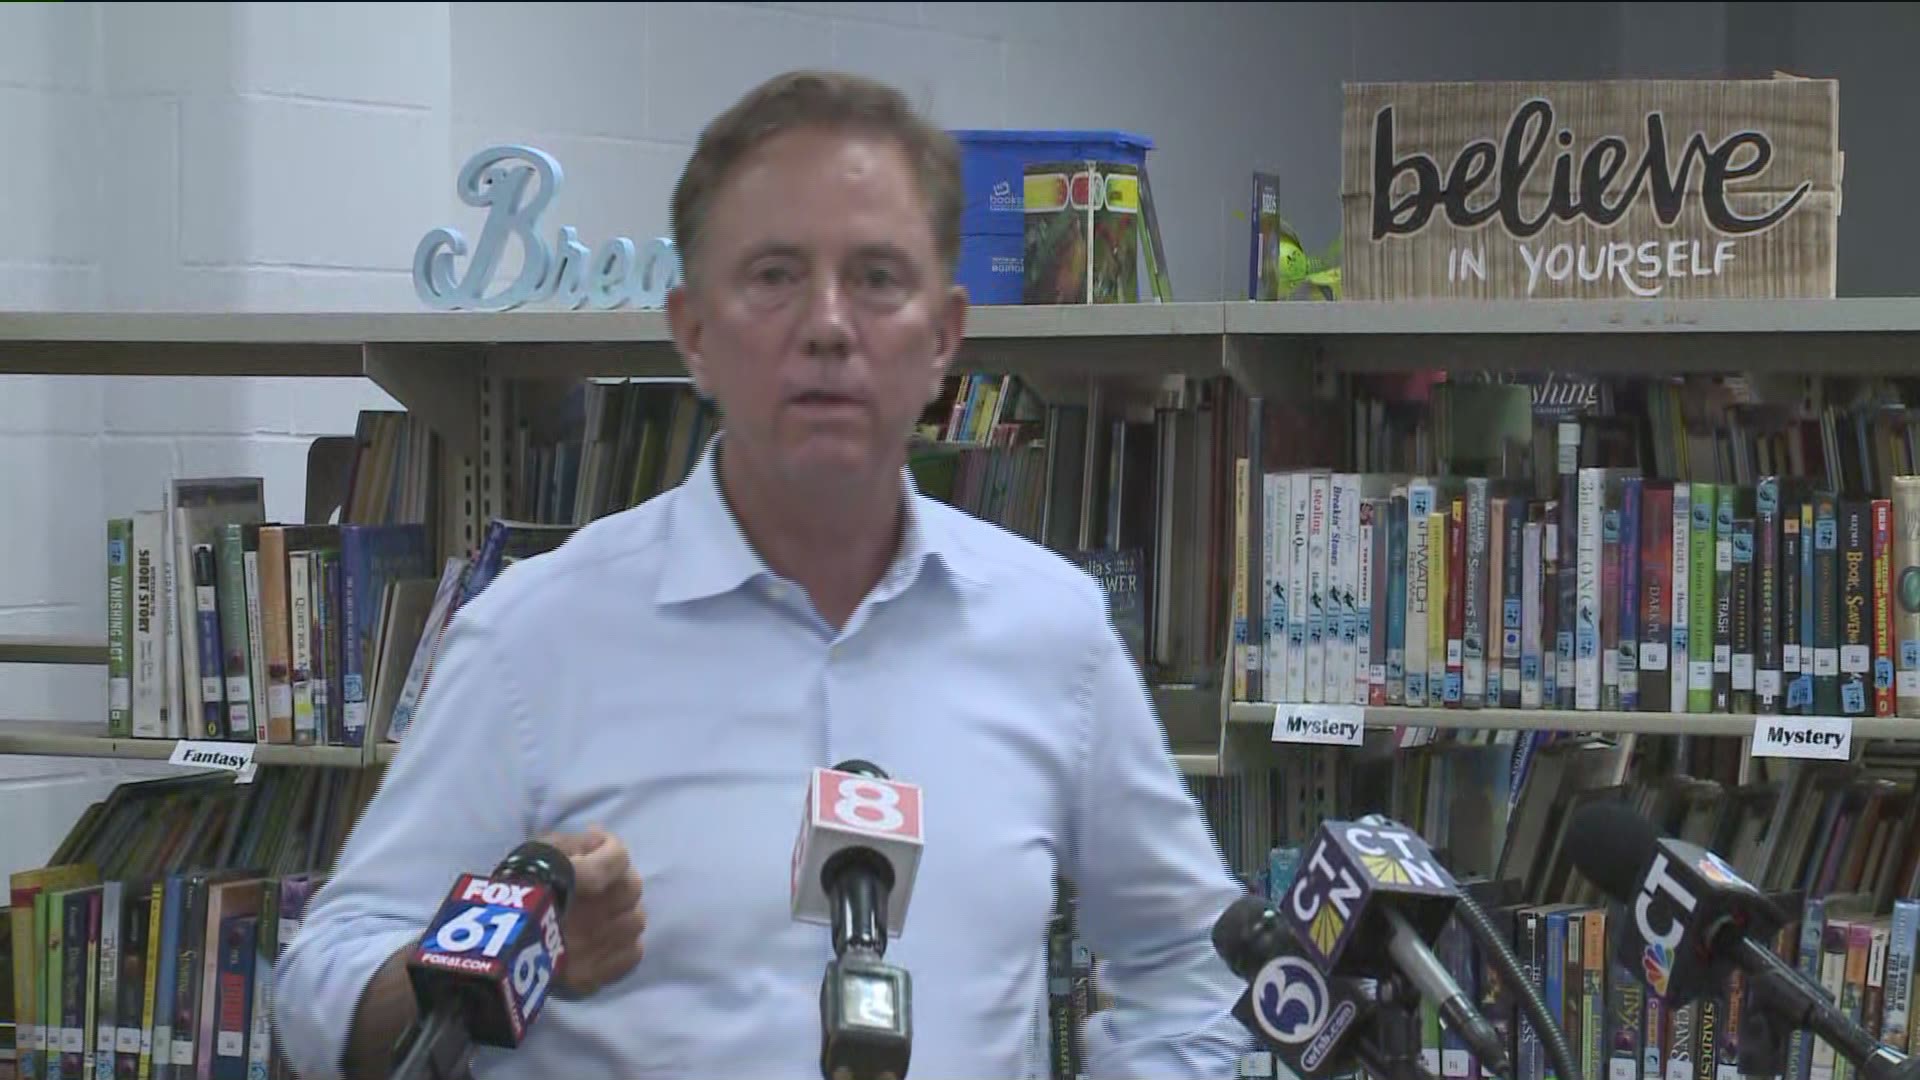 Gov. Lamont says he hopes COVID-19 metrics don't change for the worse prompting Connecticut to dial back on reopening schools.